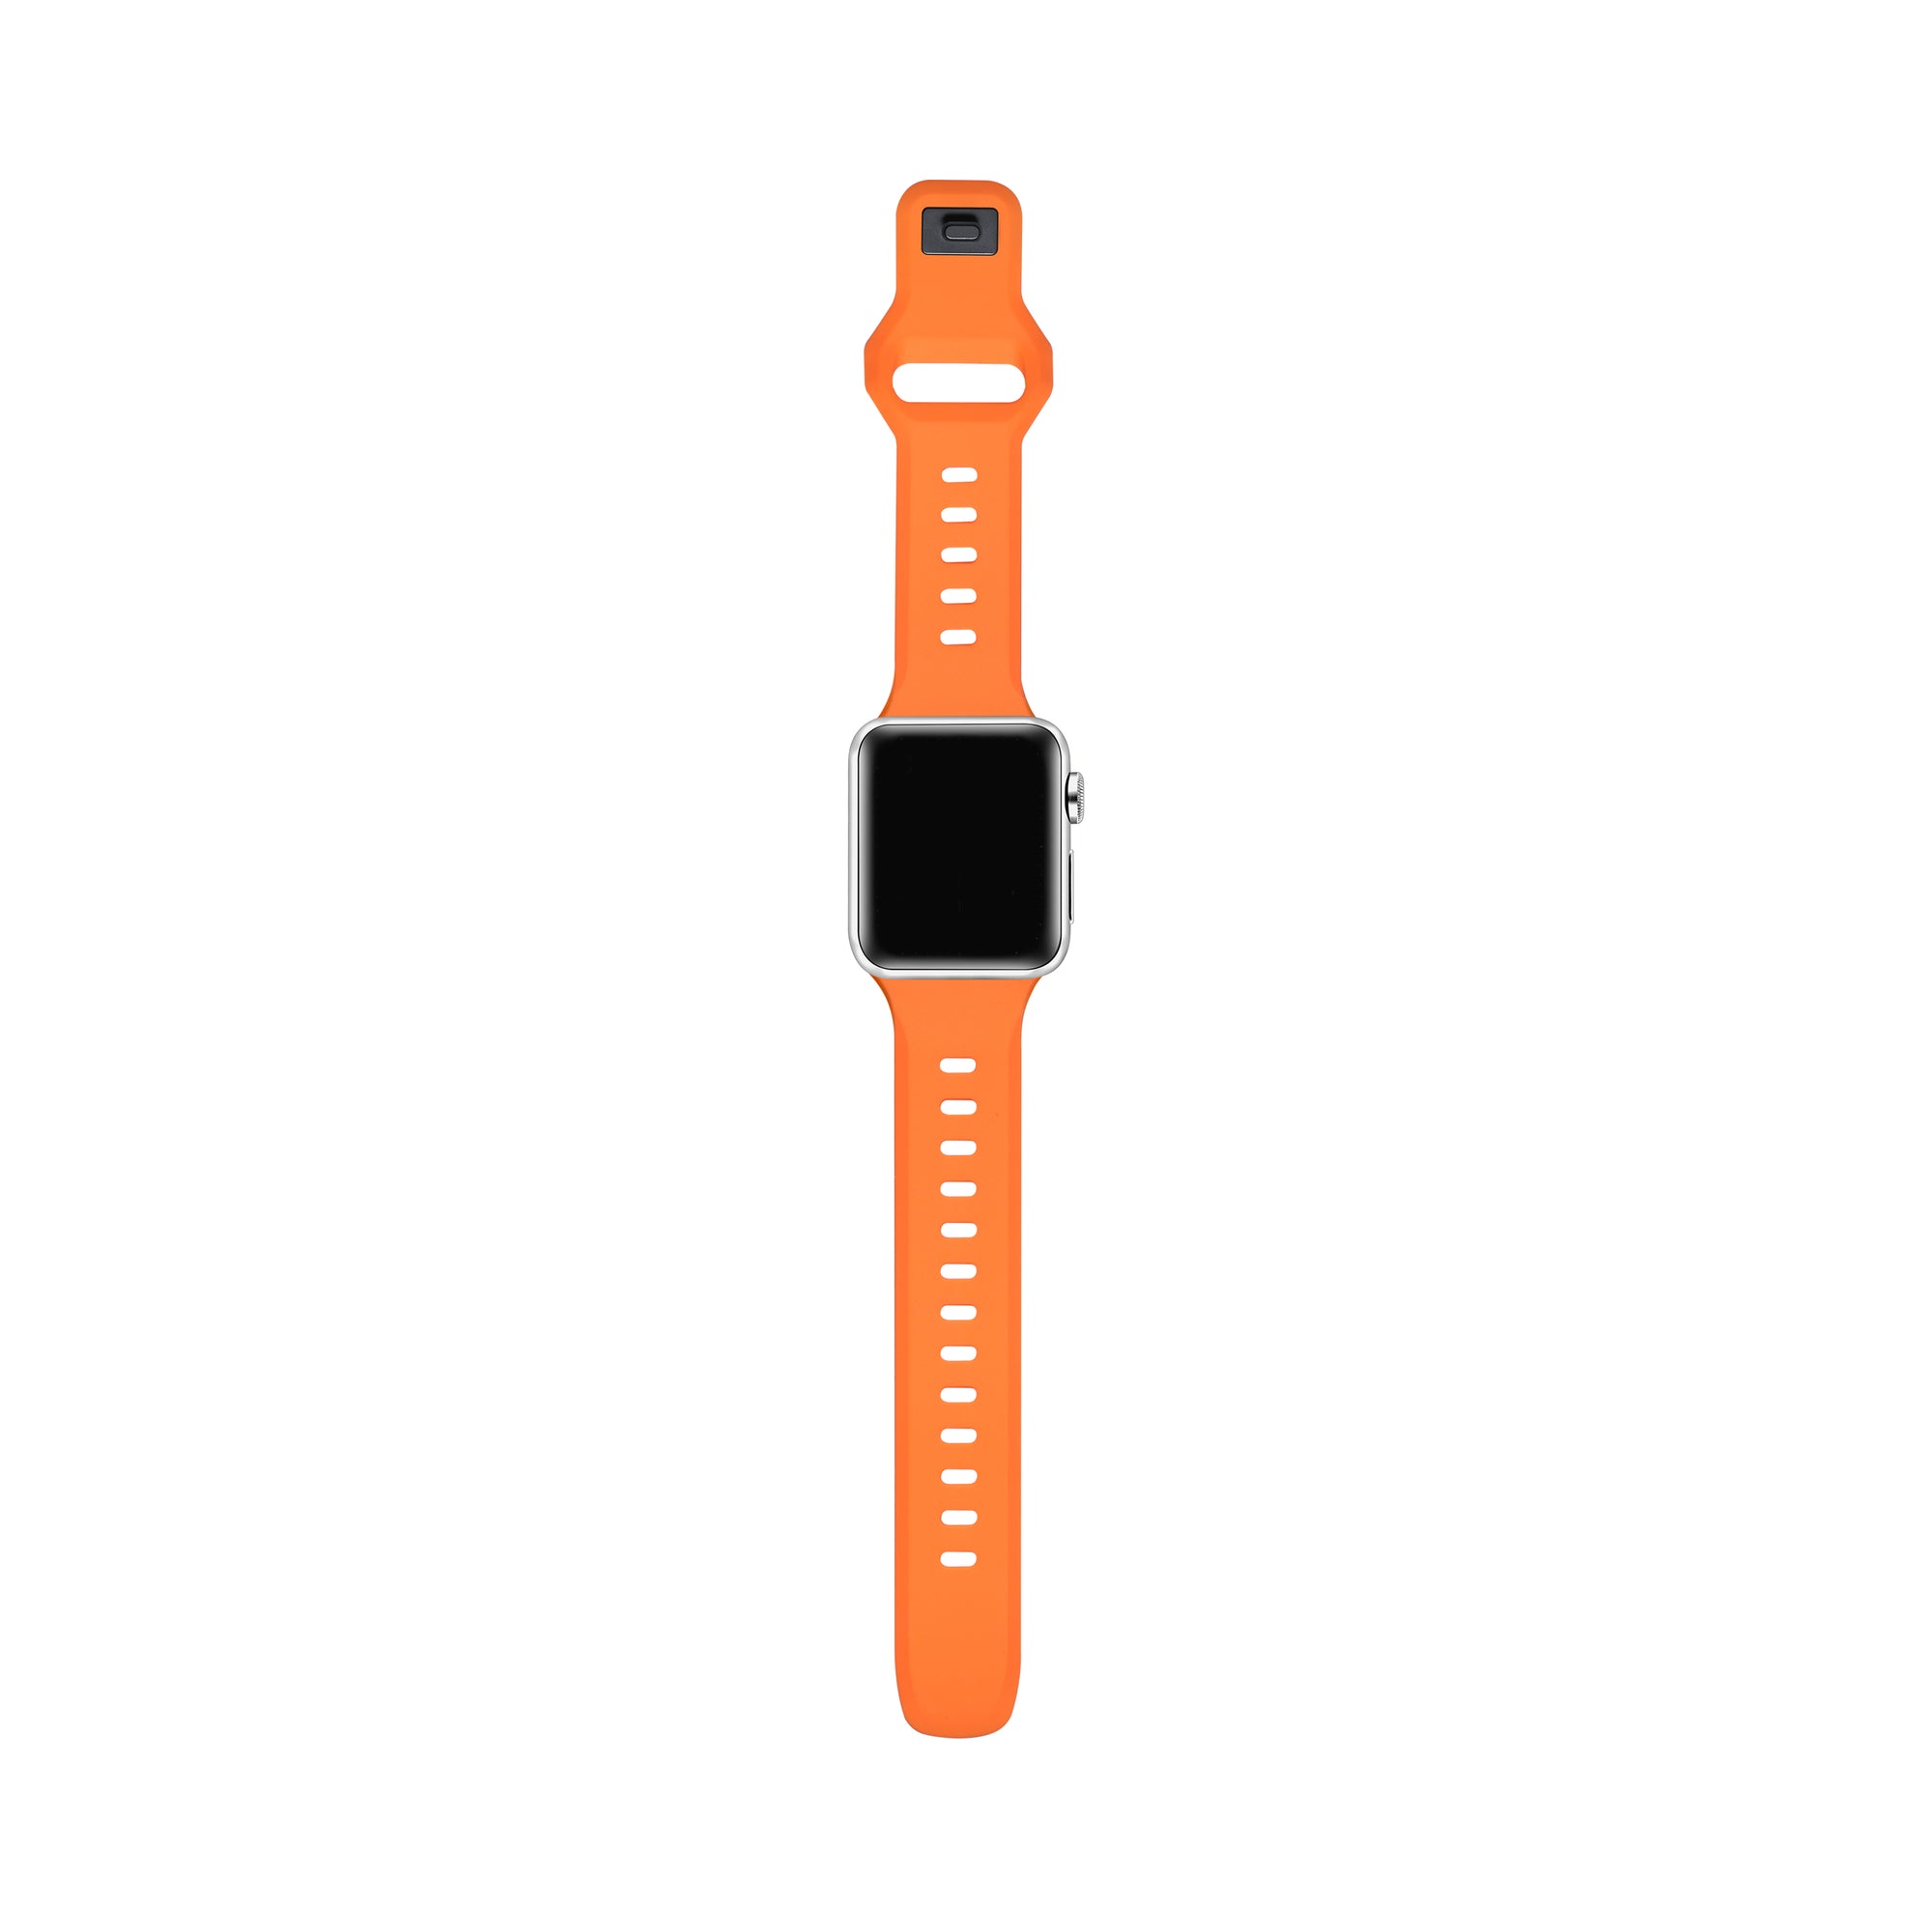 Premium Silicone Band for Apple Watch